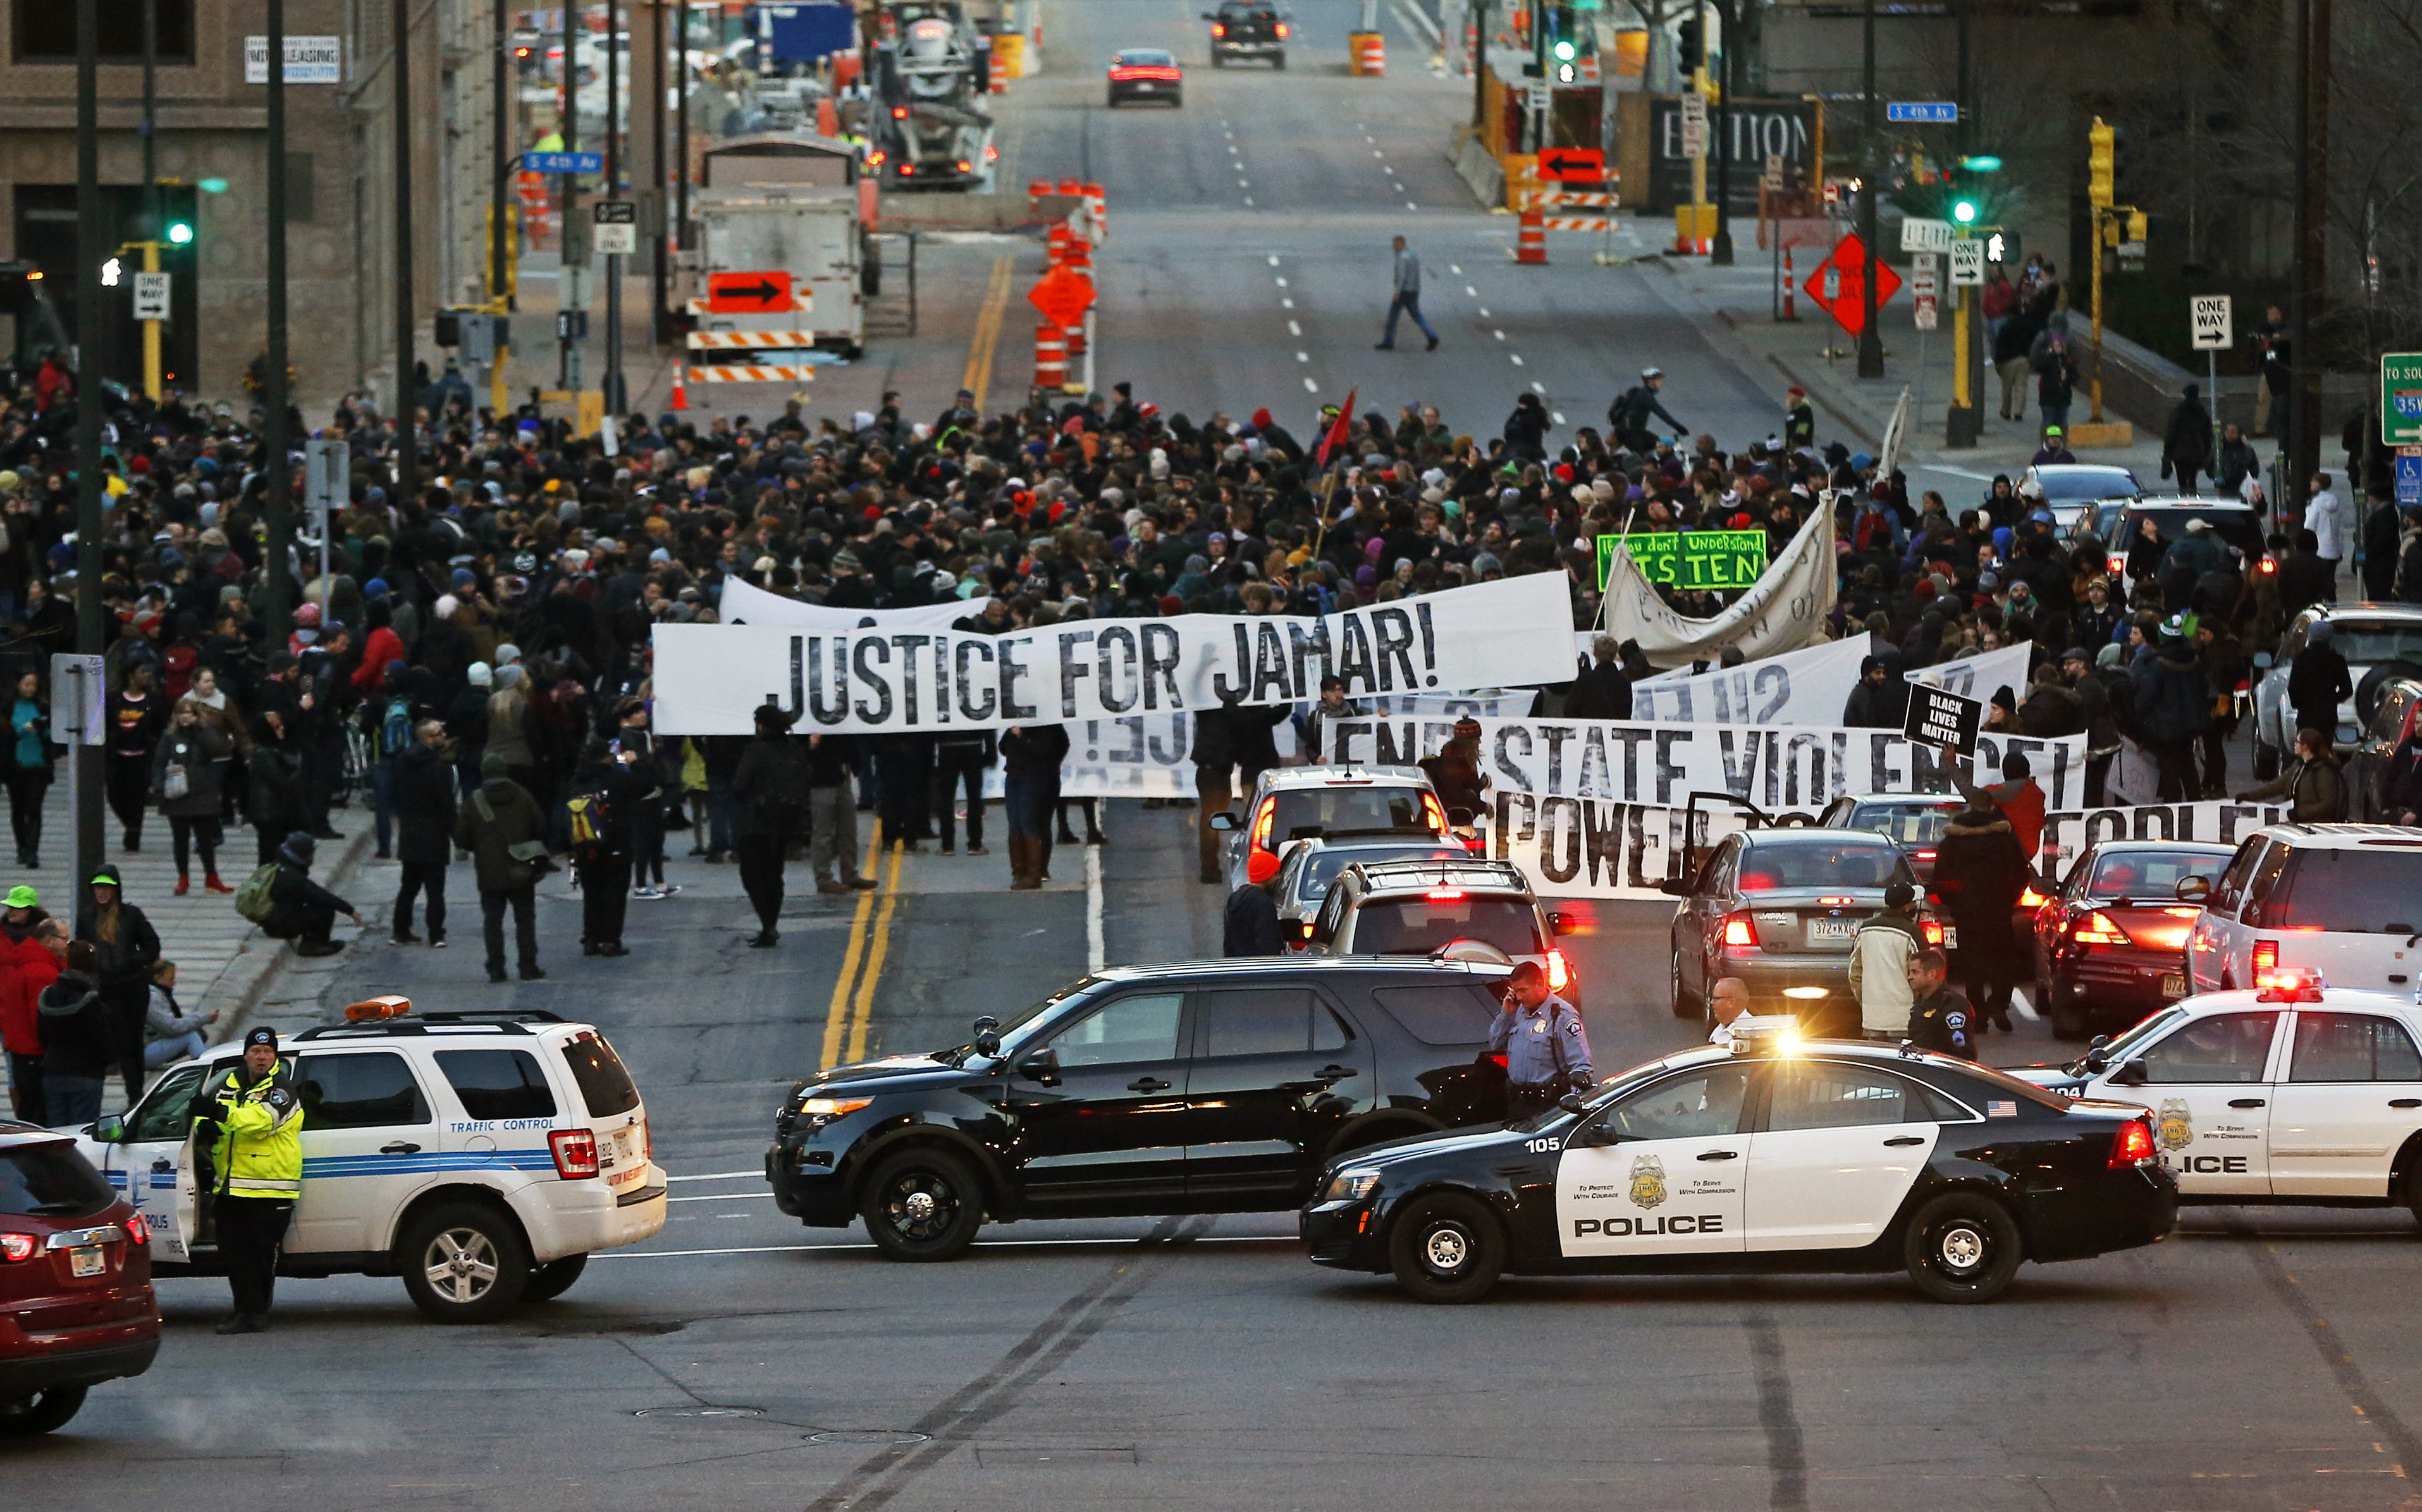 Hundreds of Black Lives Matter demonstrators and supporters occupy the street in front of the federal building, Tuesday, Nov. 24, 2015, in Minneapolis, after marching from the Police Department's Fourth Precinct. Jim Mone | AP 2015